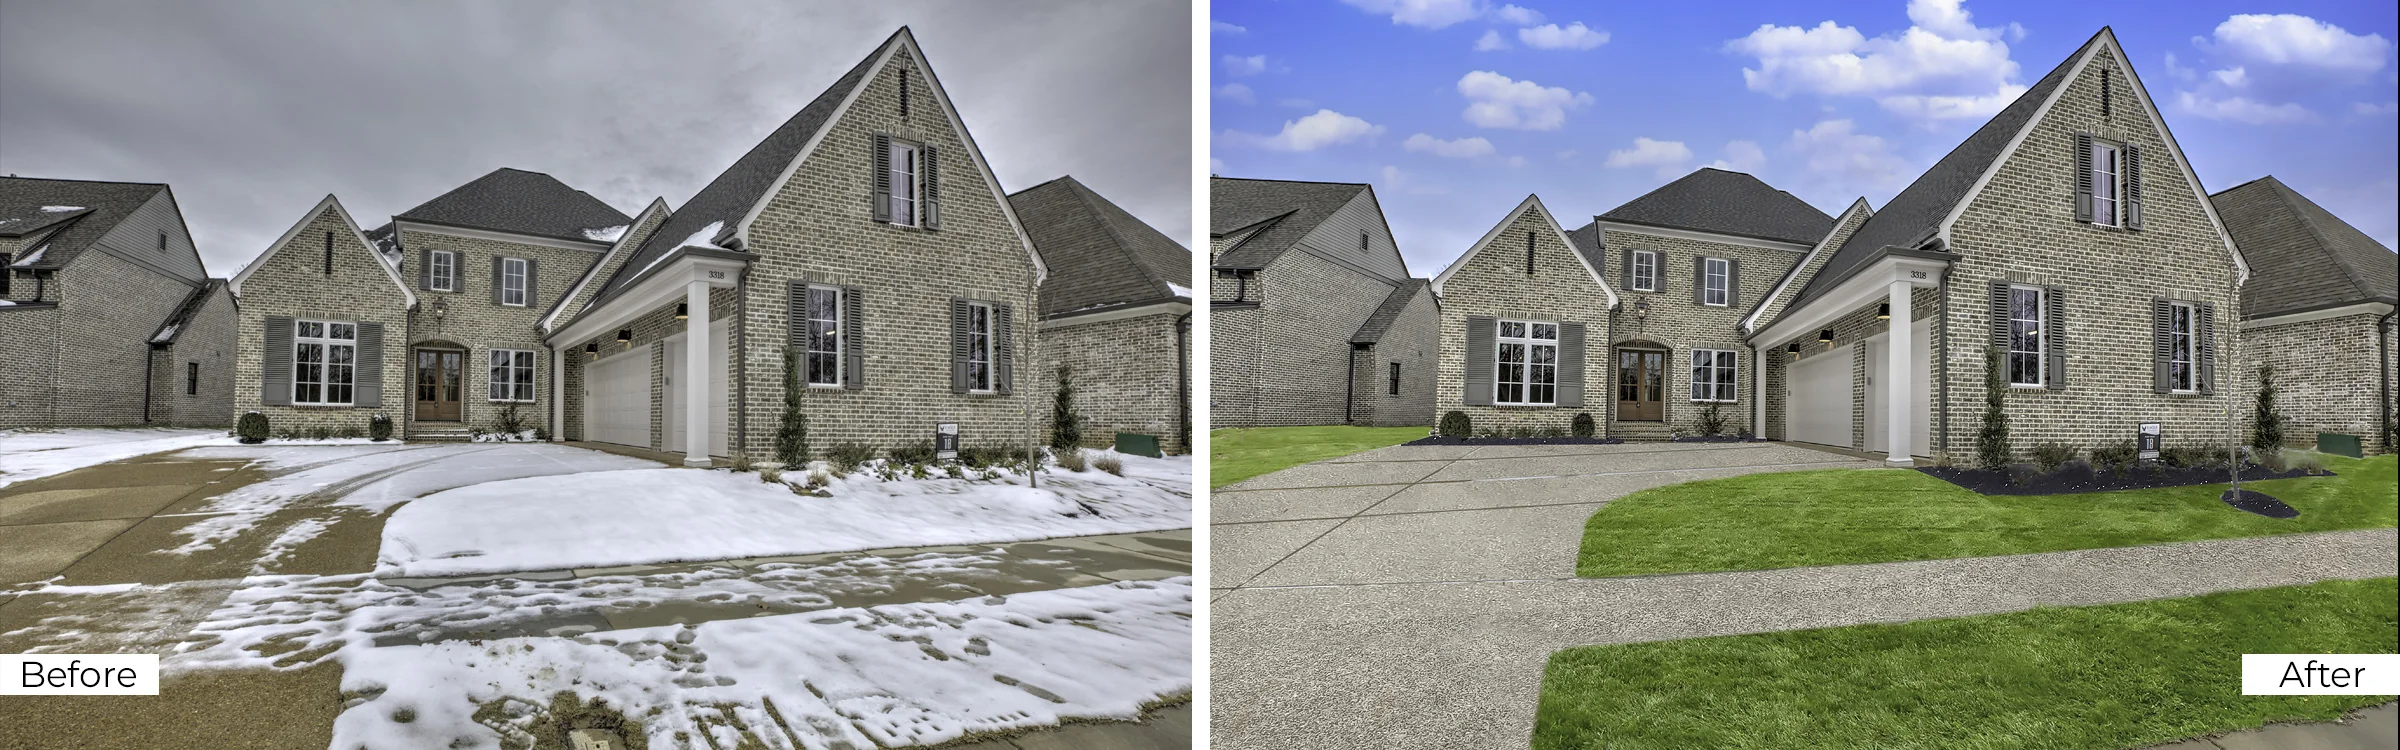 real estate photo editing snow removal